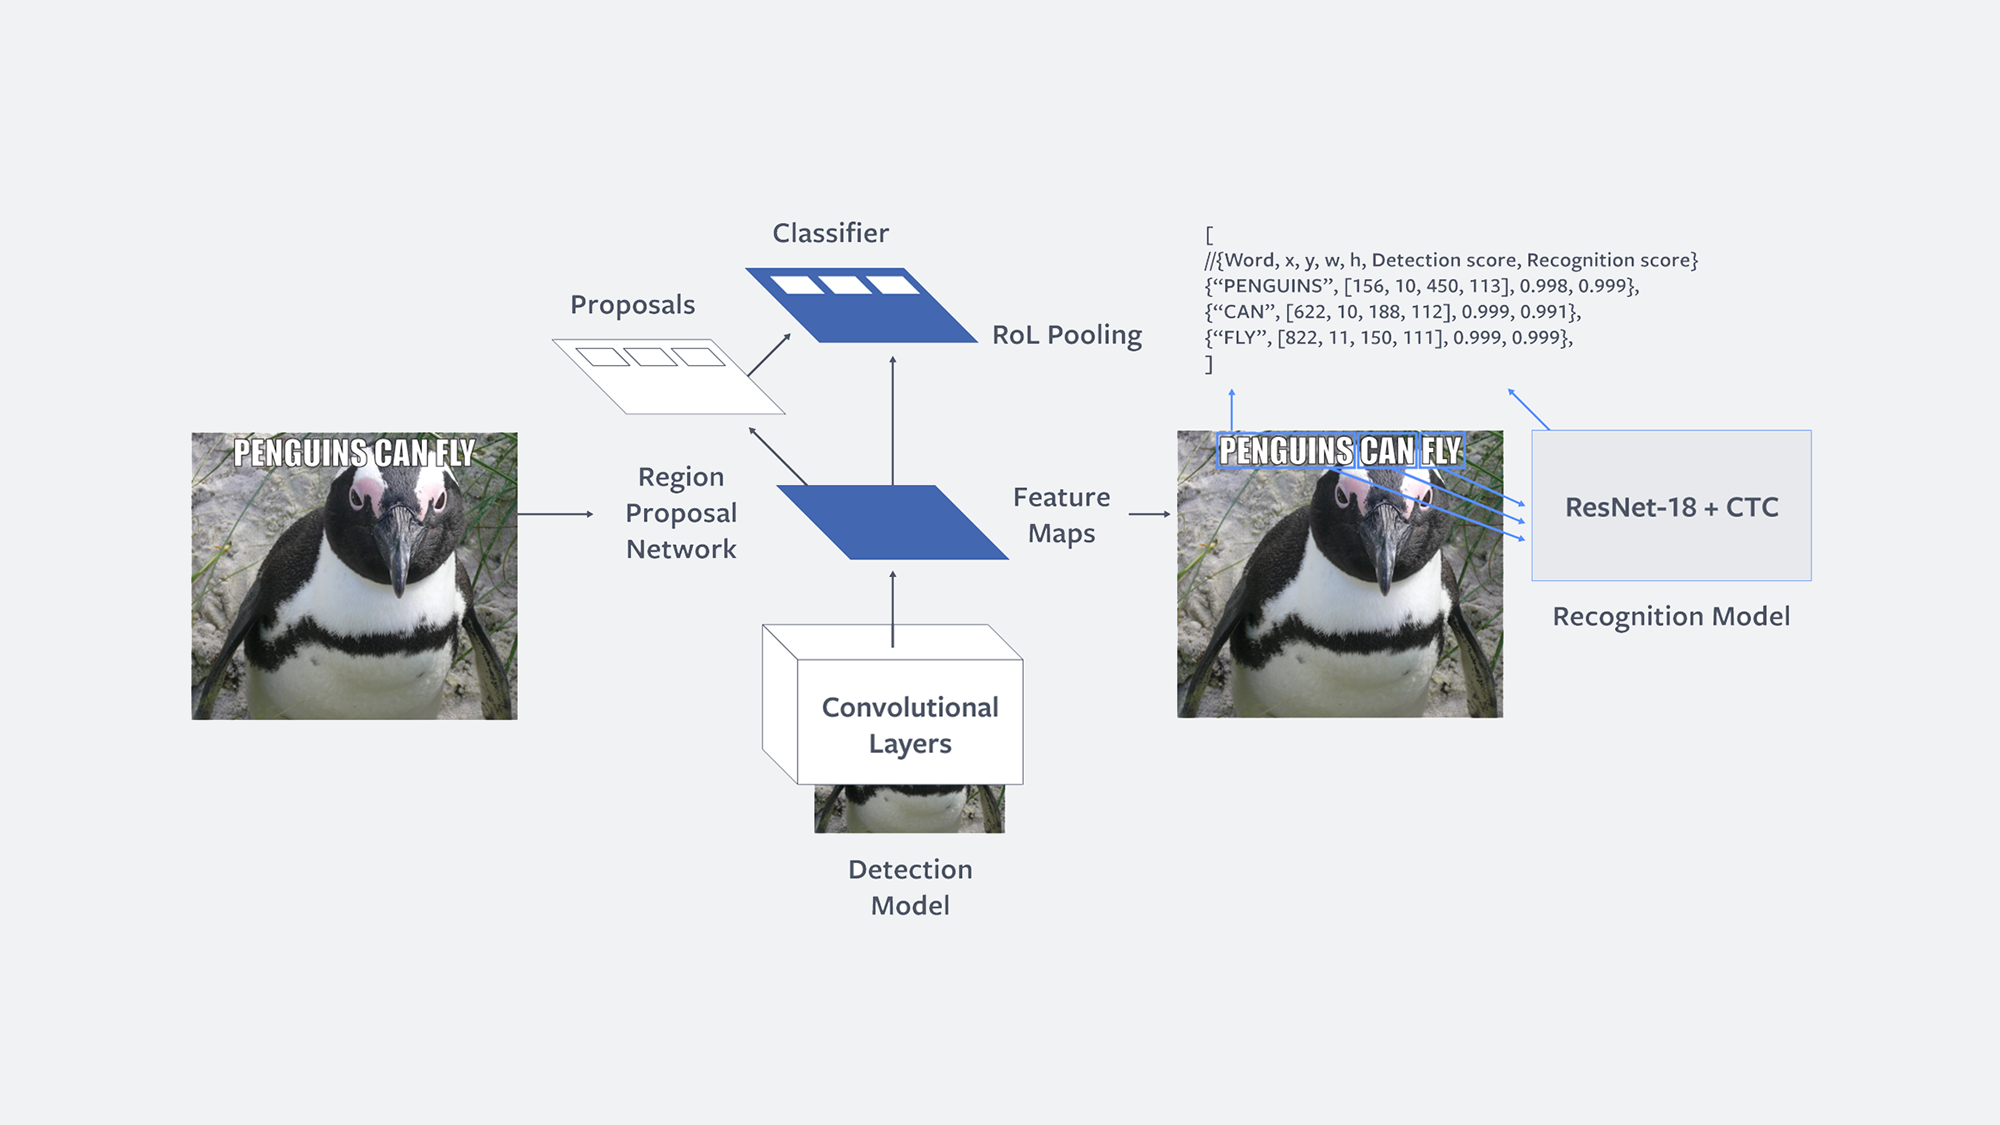 Rosetta: Understanding text in images and videos with machine learning -  Engineering at Meta